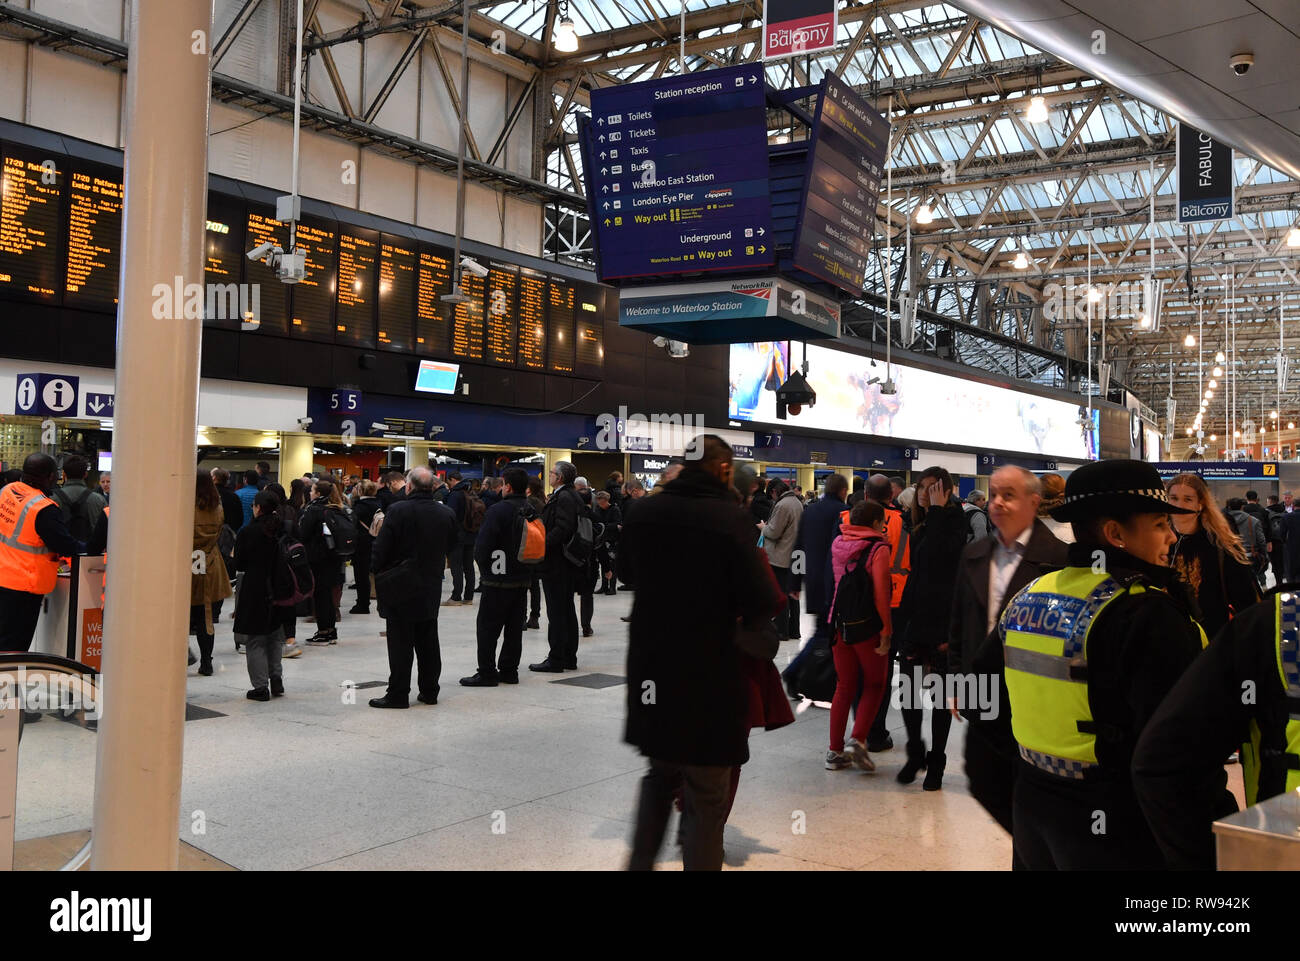 British Transport Police Officers on the concourse of Waterloo Railway Station, London, after three small improvised explosive devices were found at buildings at Heathrow Airport, London City Airport and Waterloo in what the Metropolitan Police Counter Terrorism Command said was being treated as a 'linked series'. Stock Photo